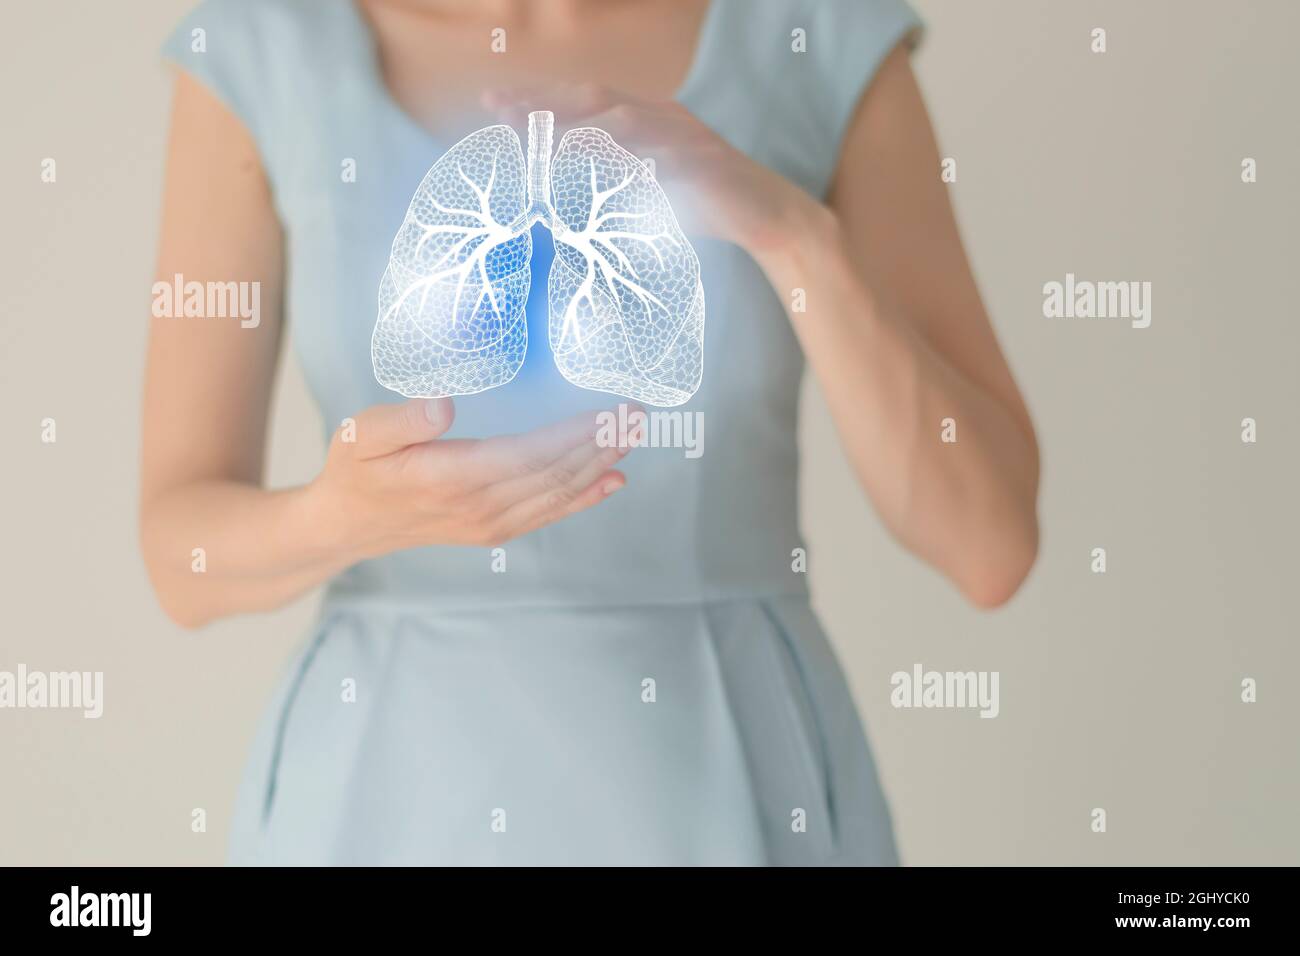 Unrecognizable female patient in blue clothes, highlighted handrawn lungs. Human respiratory system issues concept. Stock Photo